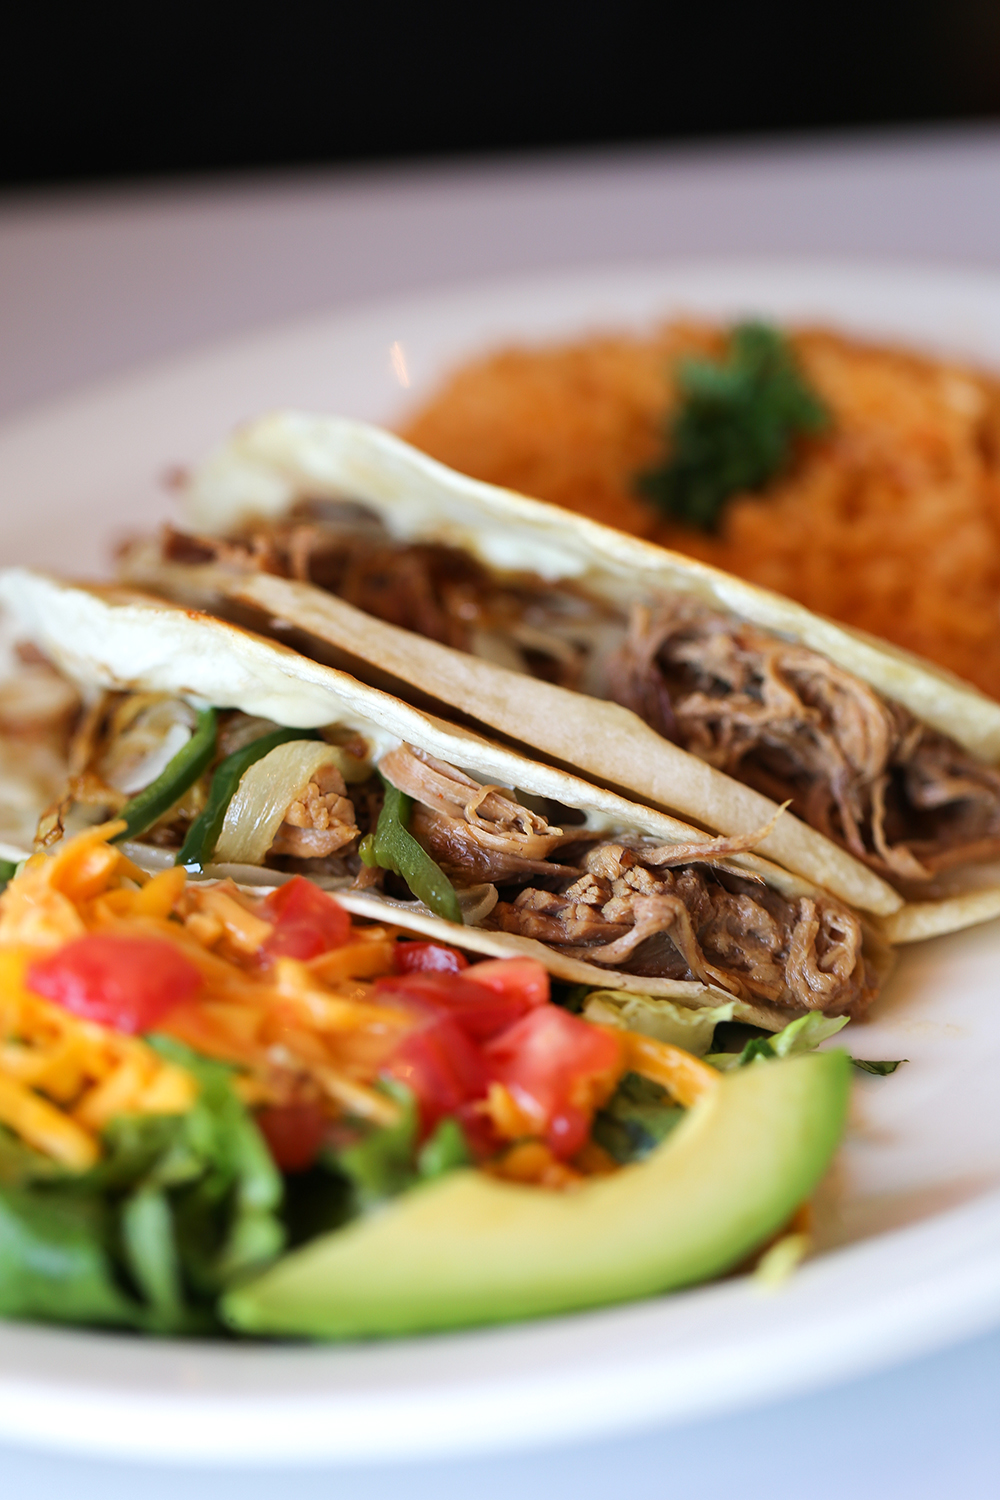 Tio Butch's Famous Brisket Tacos. Photo by Catherine Downes.